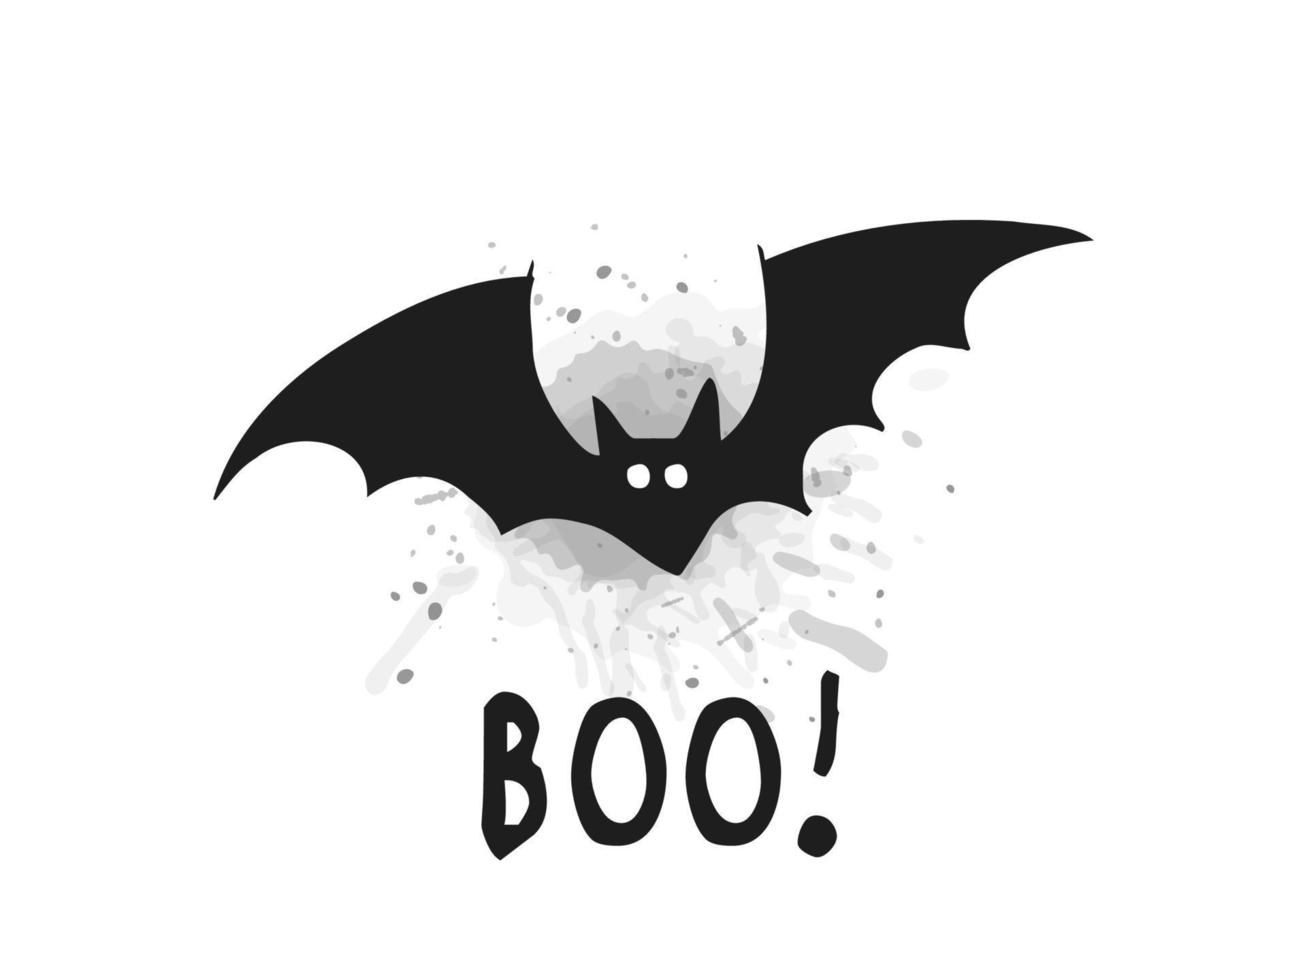 Halloween 2022 - October 31. Trick or treat. Vector hand-drawn doodle style. Silhouette of a bat with lettering on a background of gray watercolor splashes. Boo.